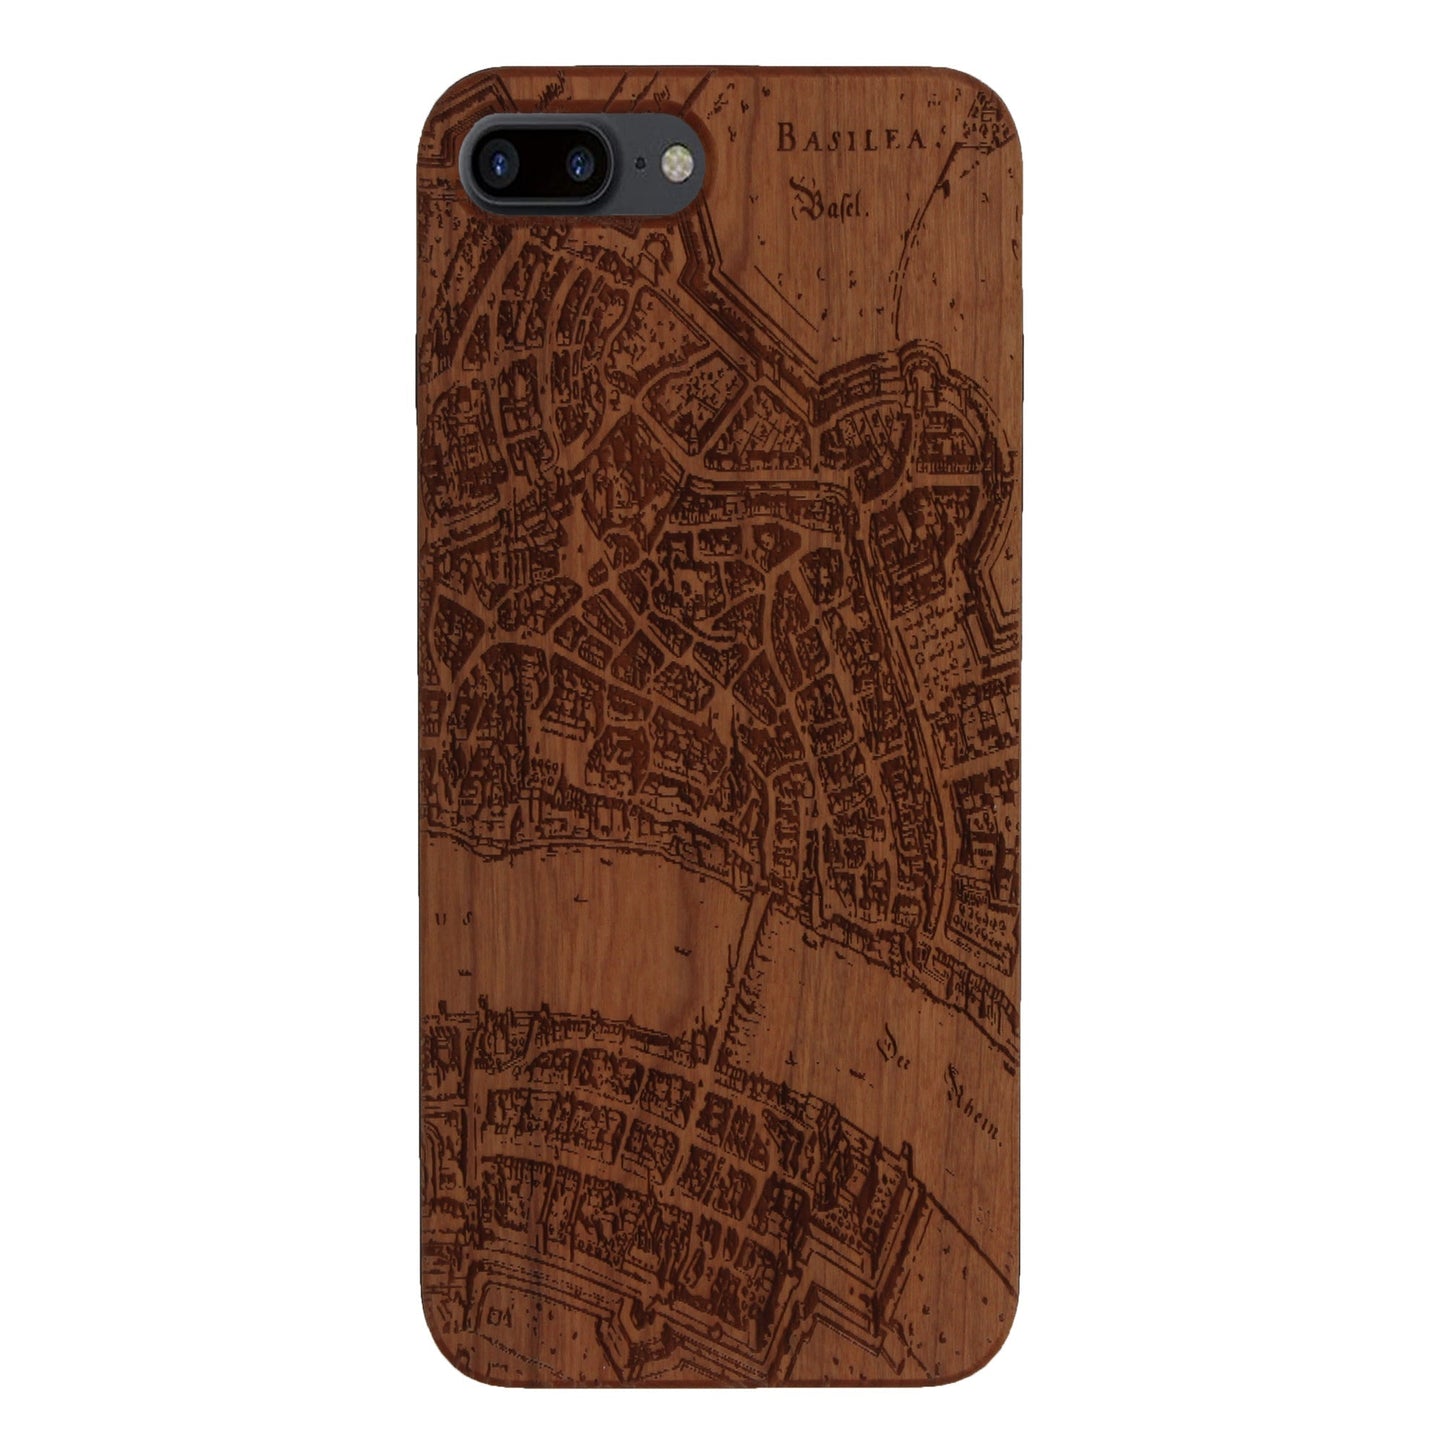 Basel Merian Eden case made of cherry wood for iPhone 6/6S/7/8 Plus